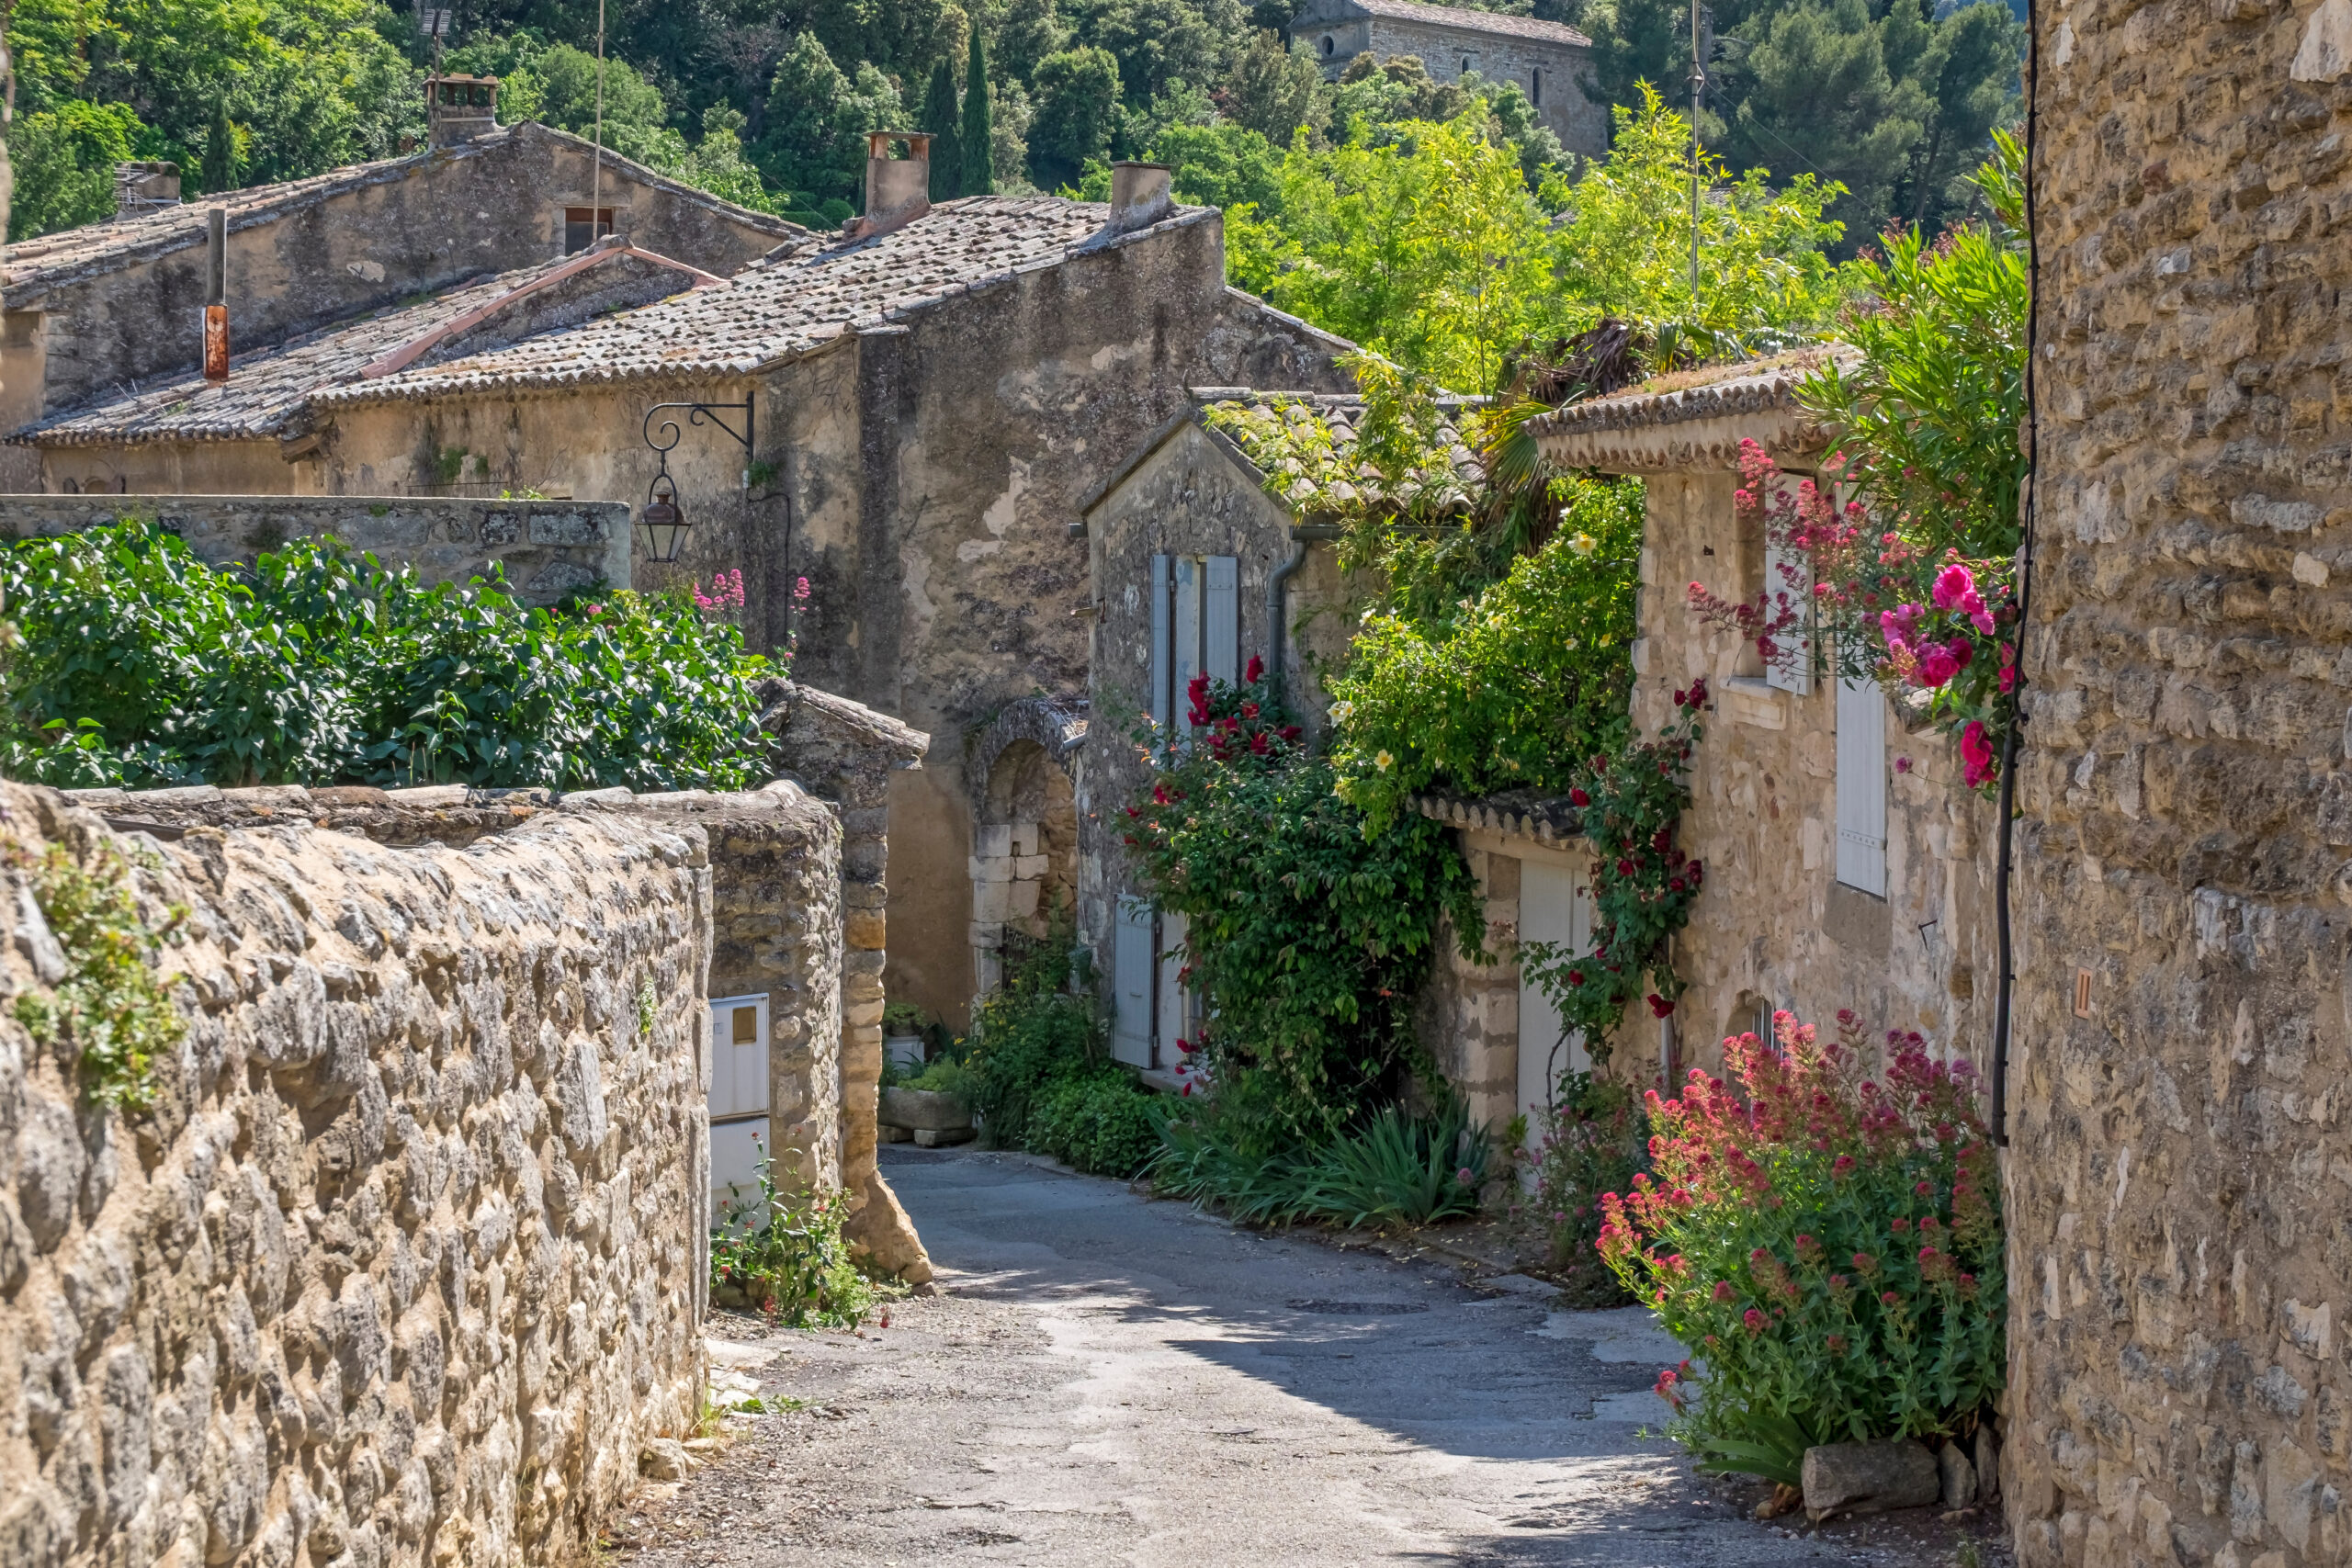 Movies set in Provence